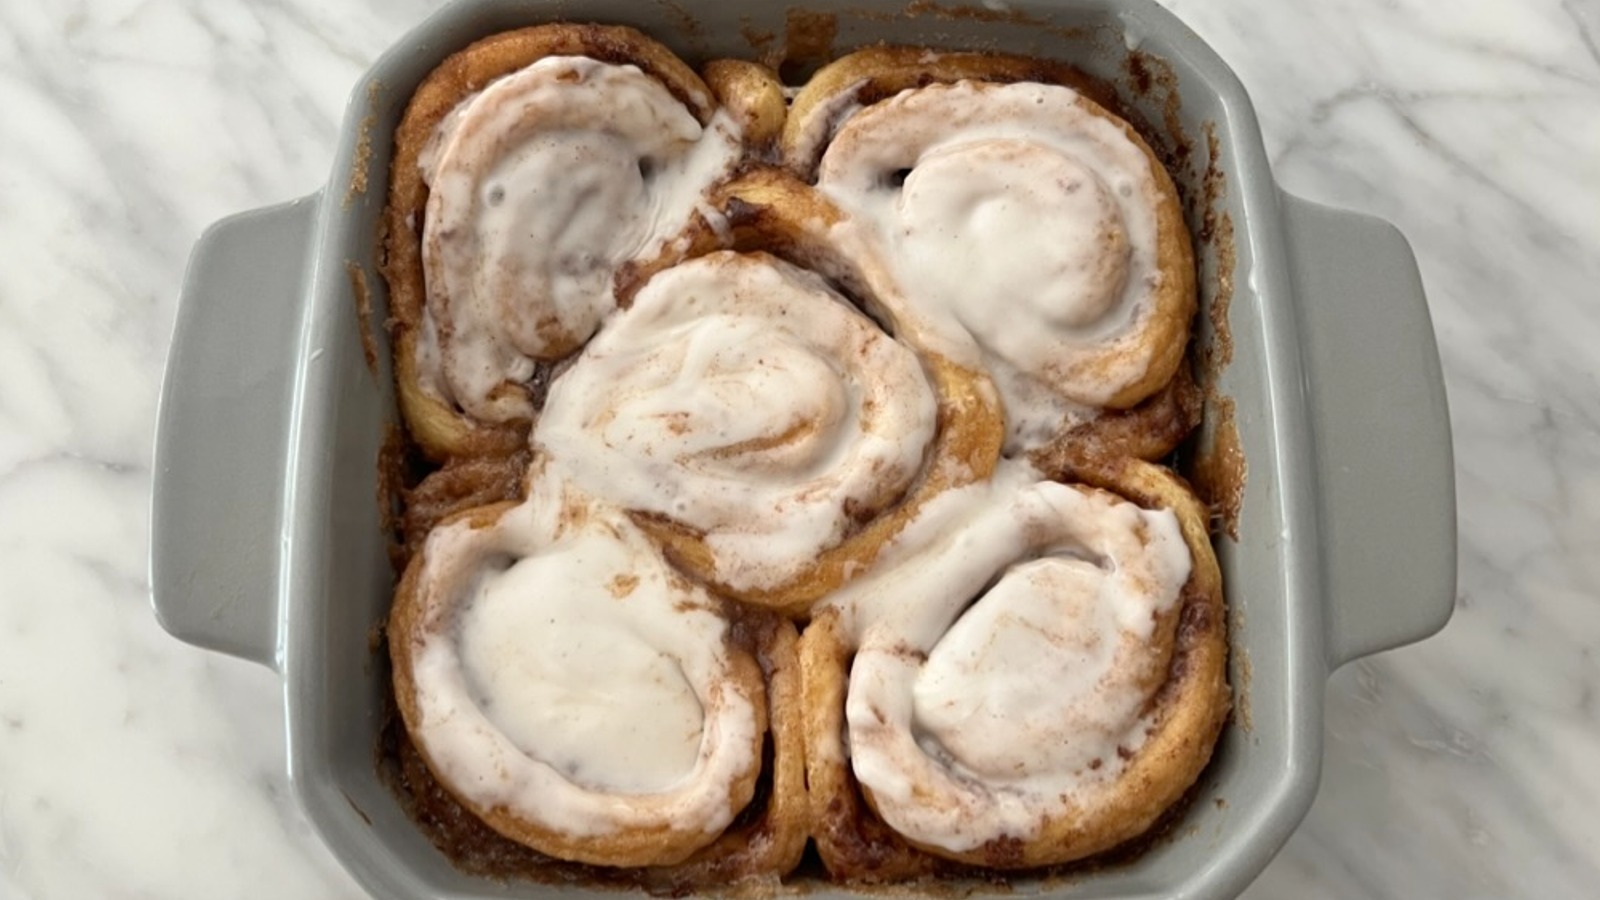 I Tried TikTok’s Cinnamon Rolls And They Were Way Too Sweet – Mashed